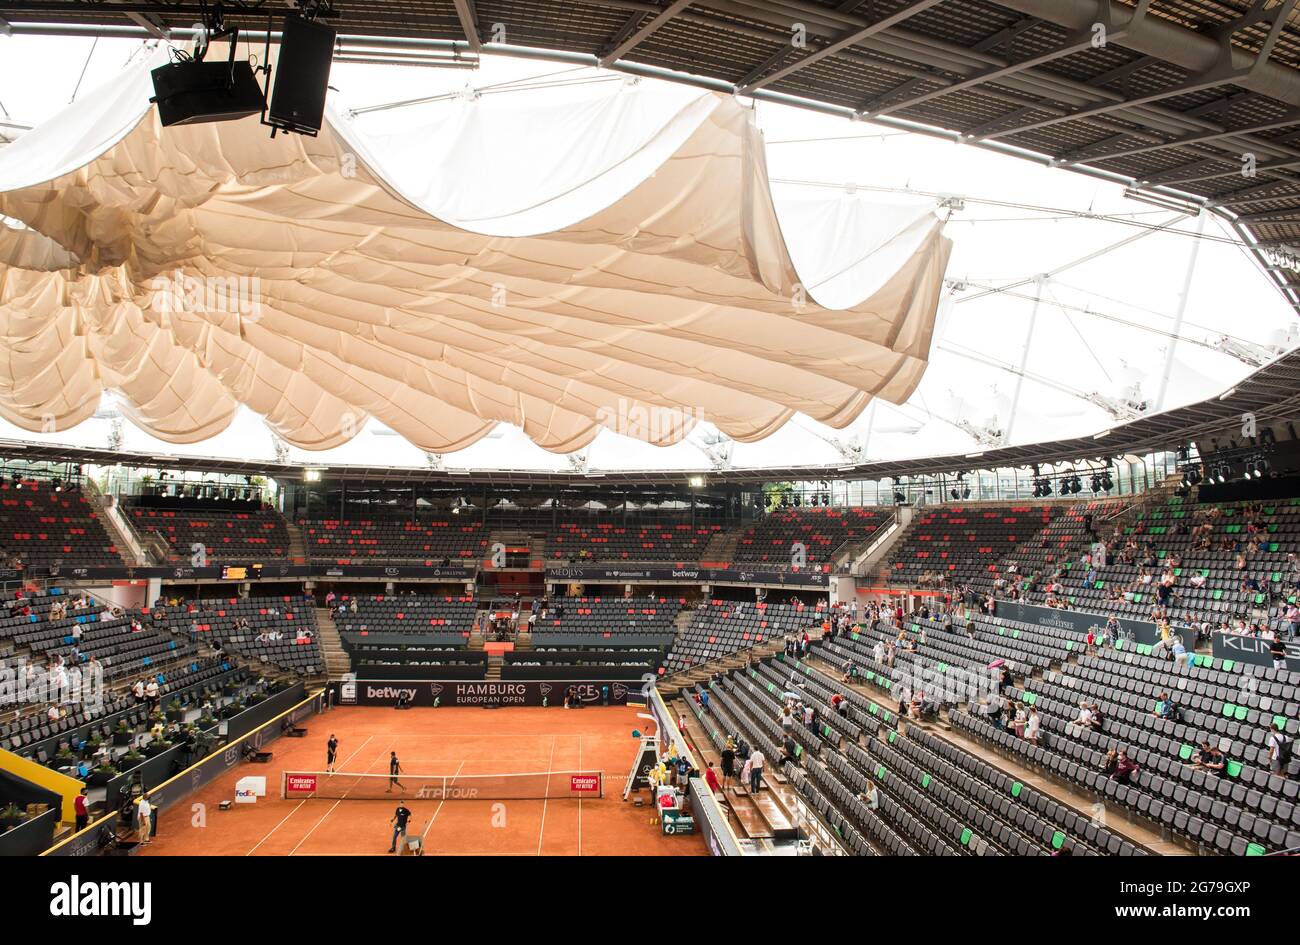 Hamburg, Germany. 12th July, 2021. Tennis: ATP Tour - Hamburg, Singles,  Men, 1st round at Stadion Am Rothenbaum. Moutet (France) - Baez  (Argentina). The roof over Center Court is closed during a